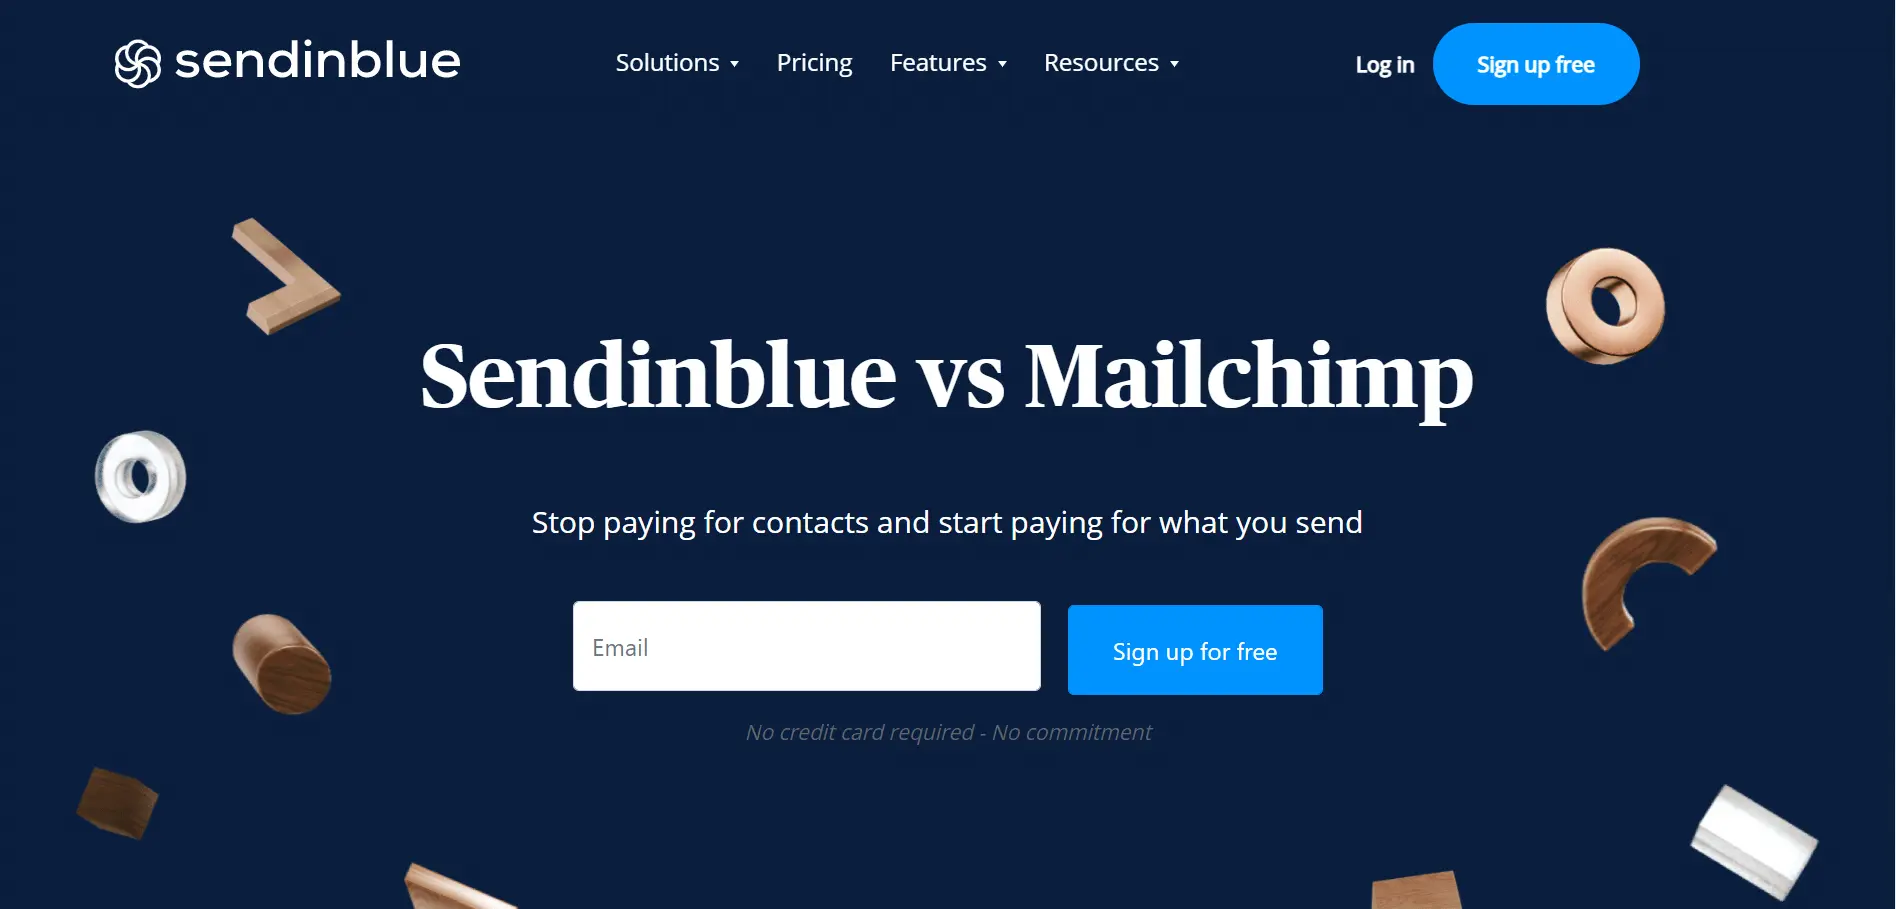 This is the screenshot of the Sendinblue website. It is one of the top email marketing tools in the world.